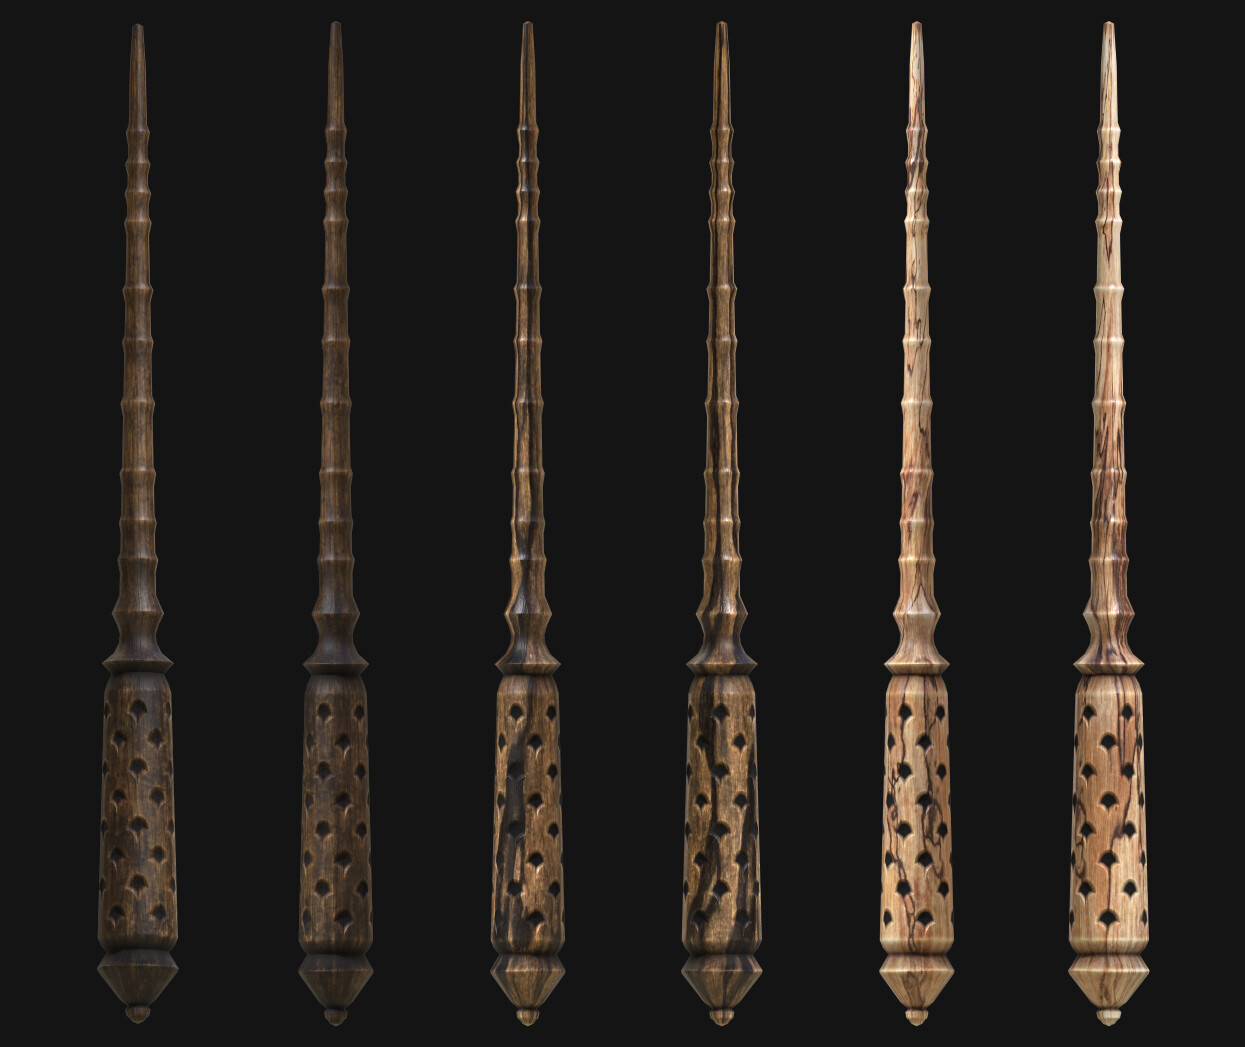 Professor Howin's Wand and variations. 